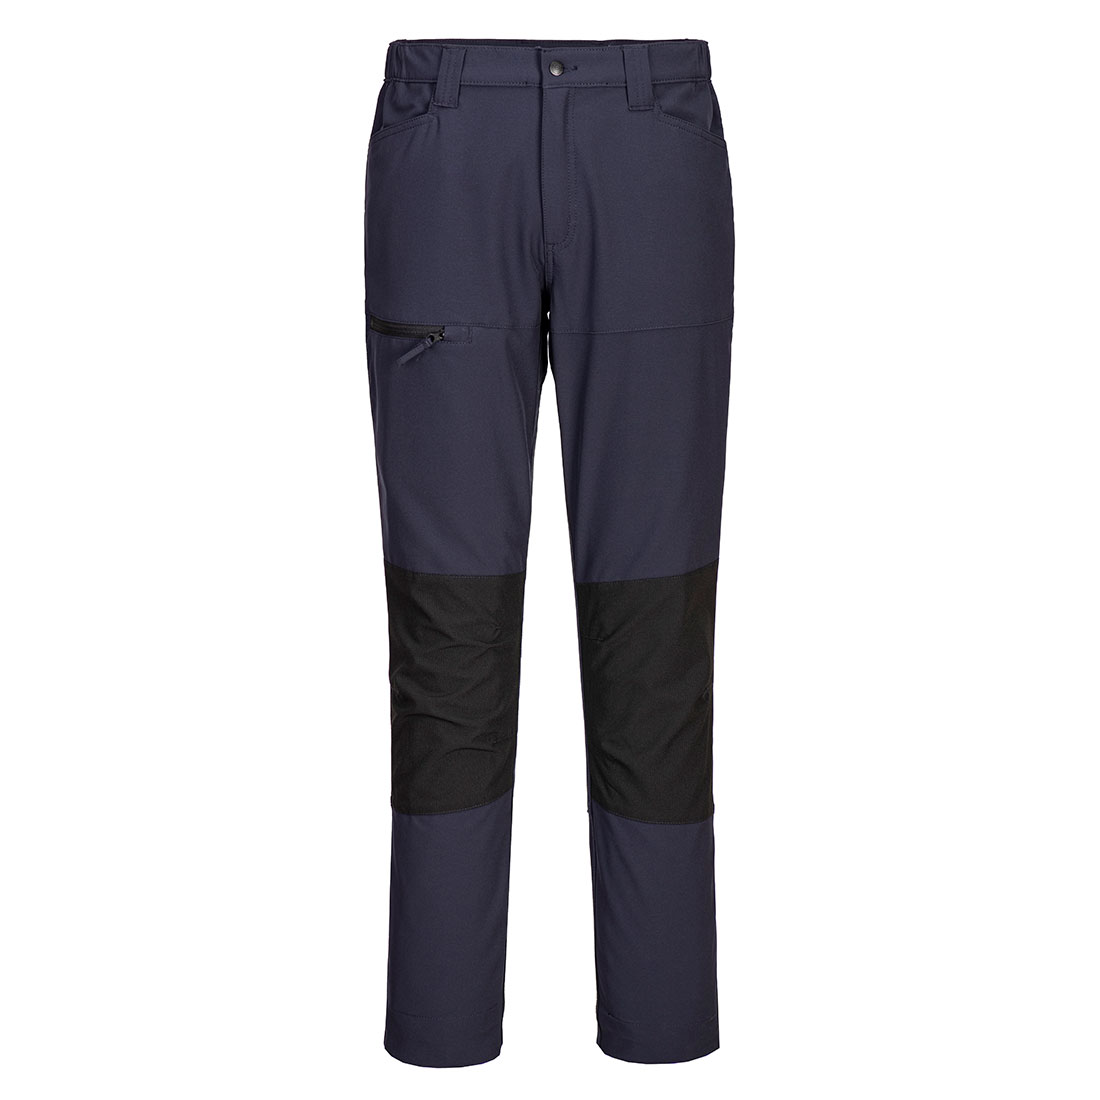 CD886 - WX2 Eco Active Stretch Work Trousers Dark Navy/Black